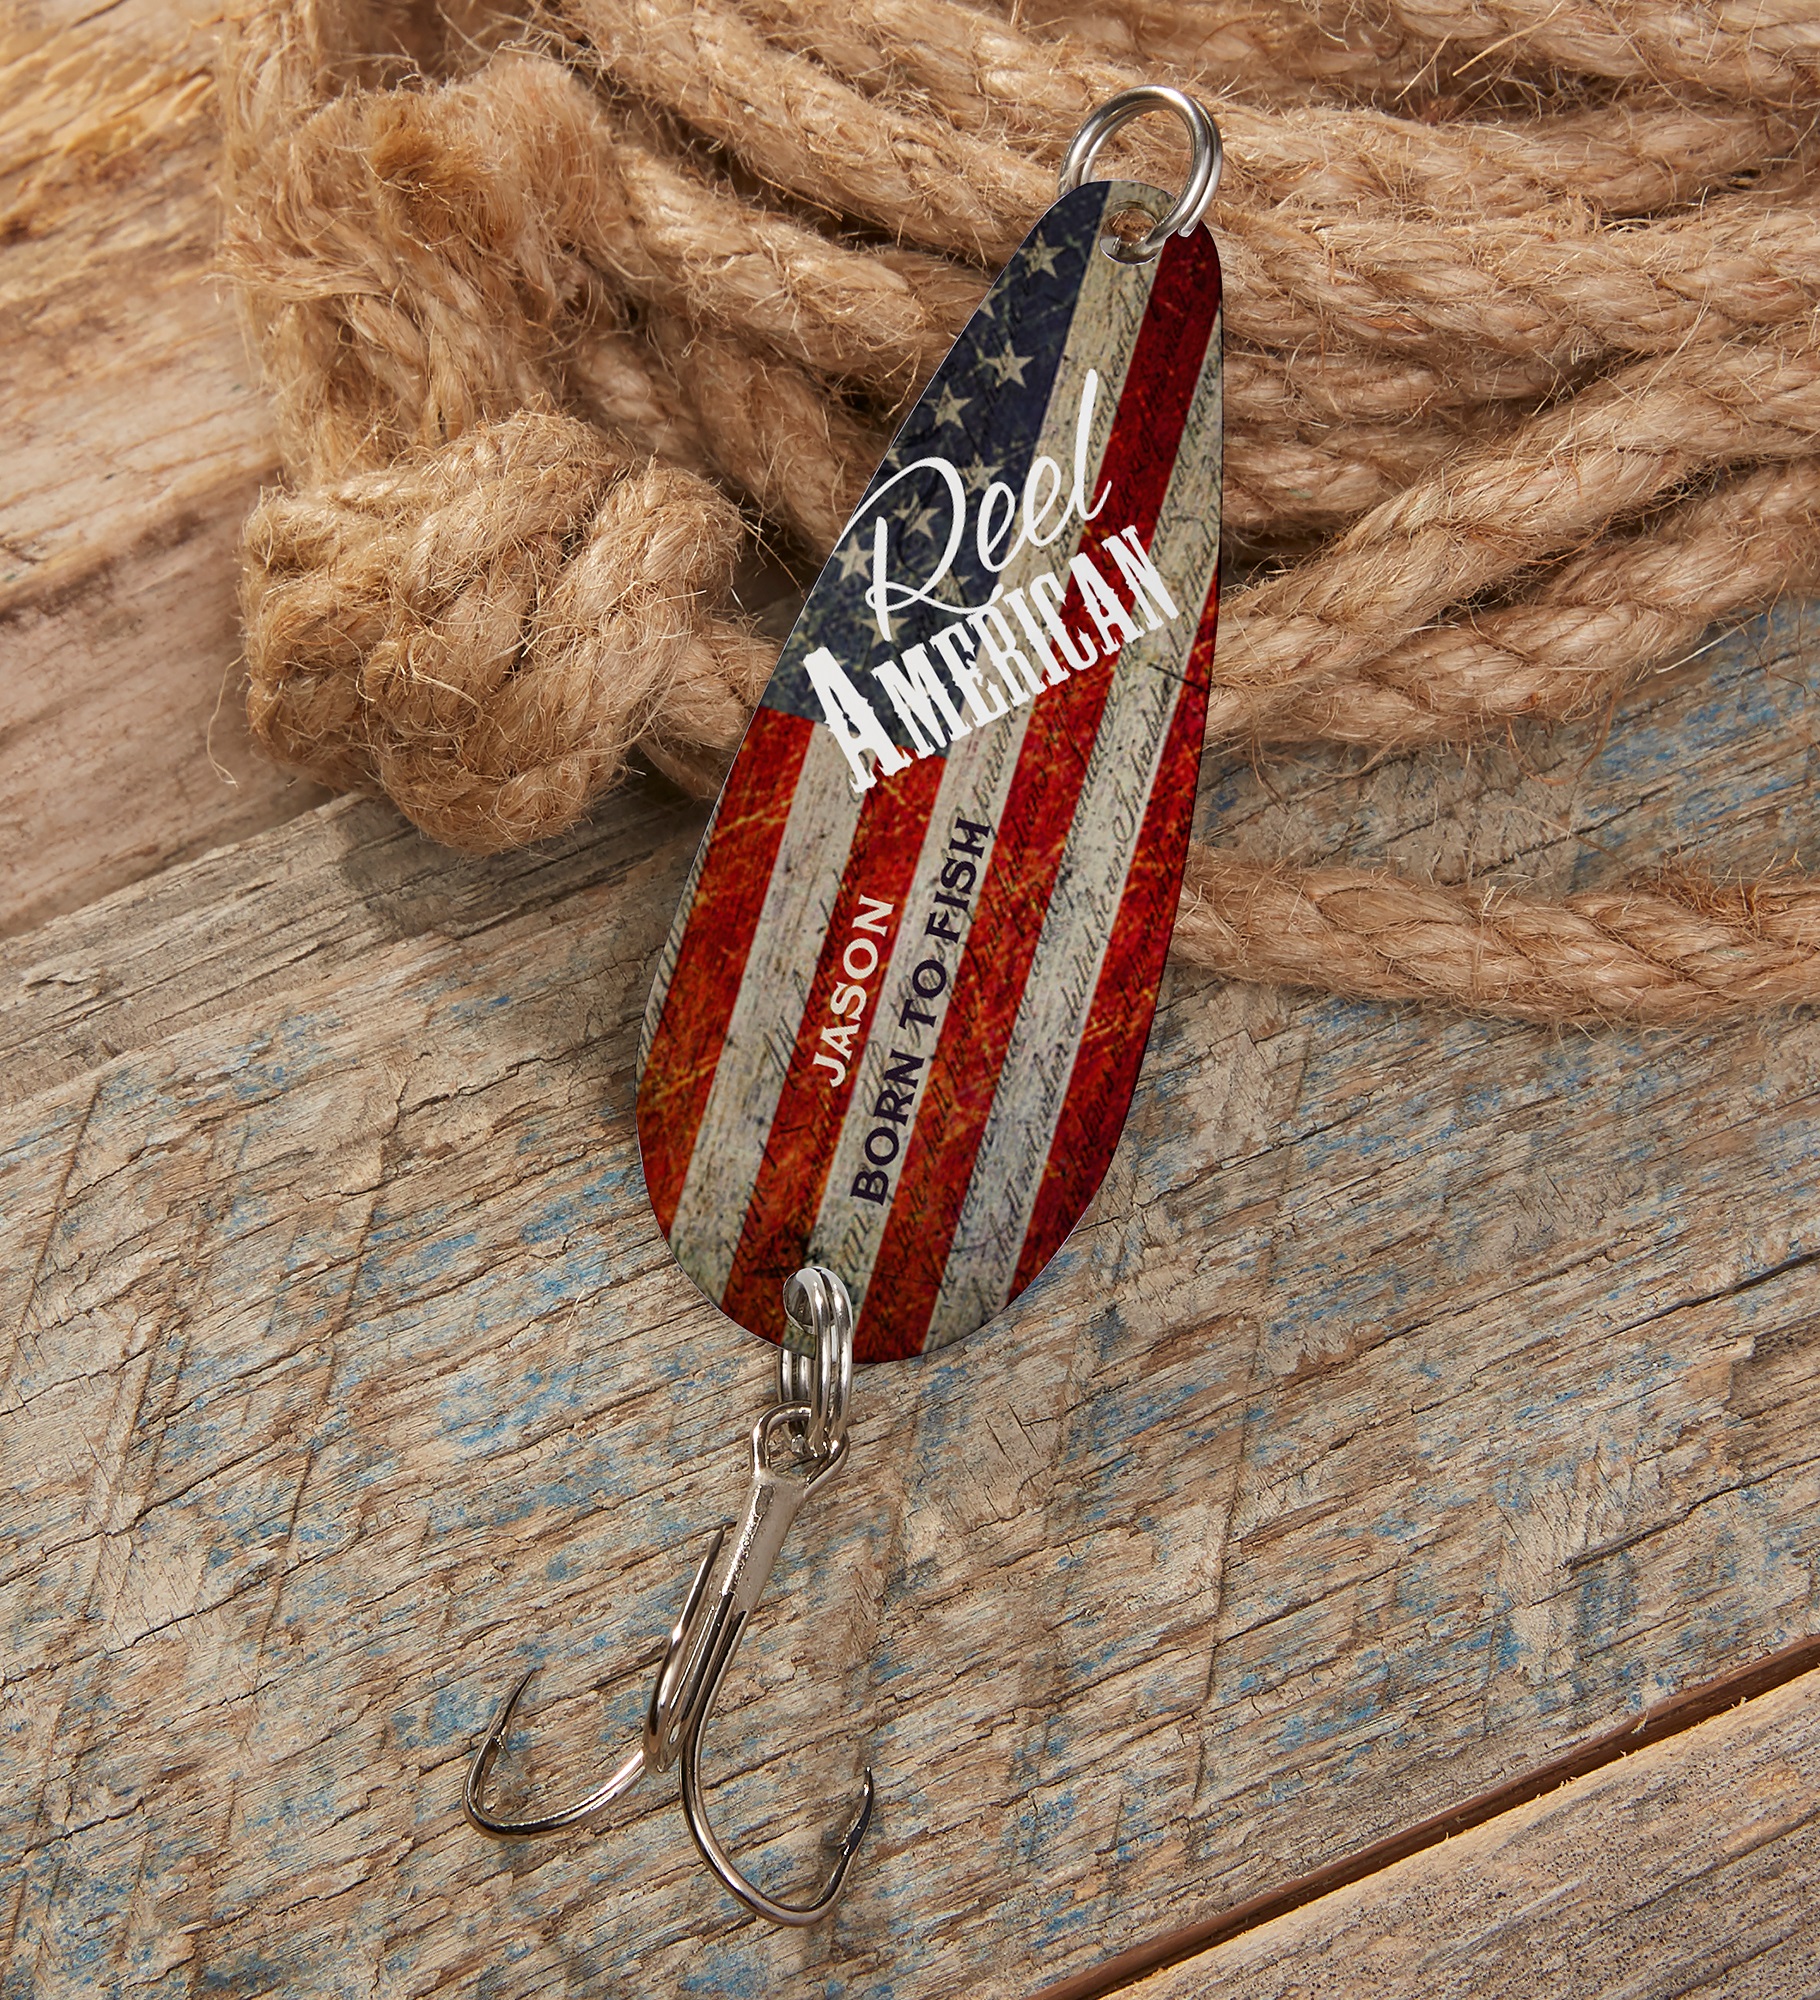 Reel American Personalized Fishing Lure